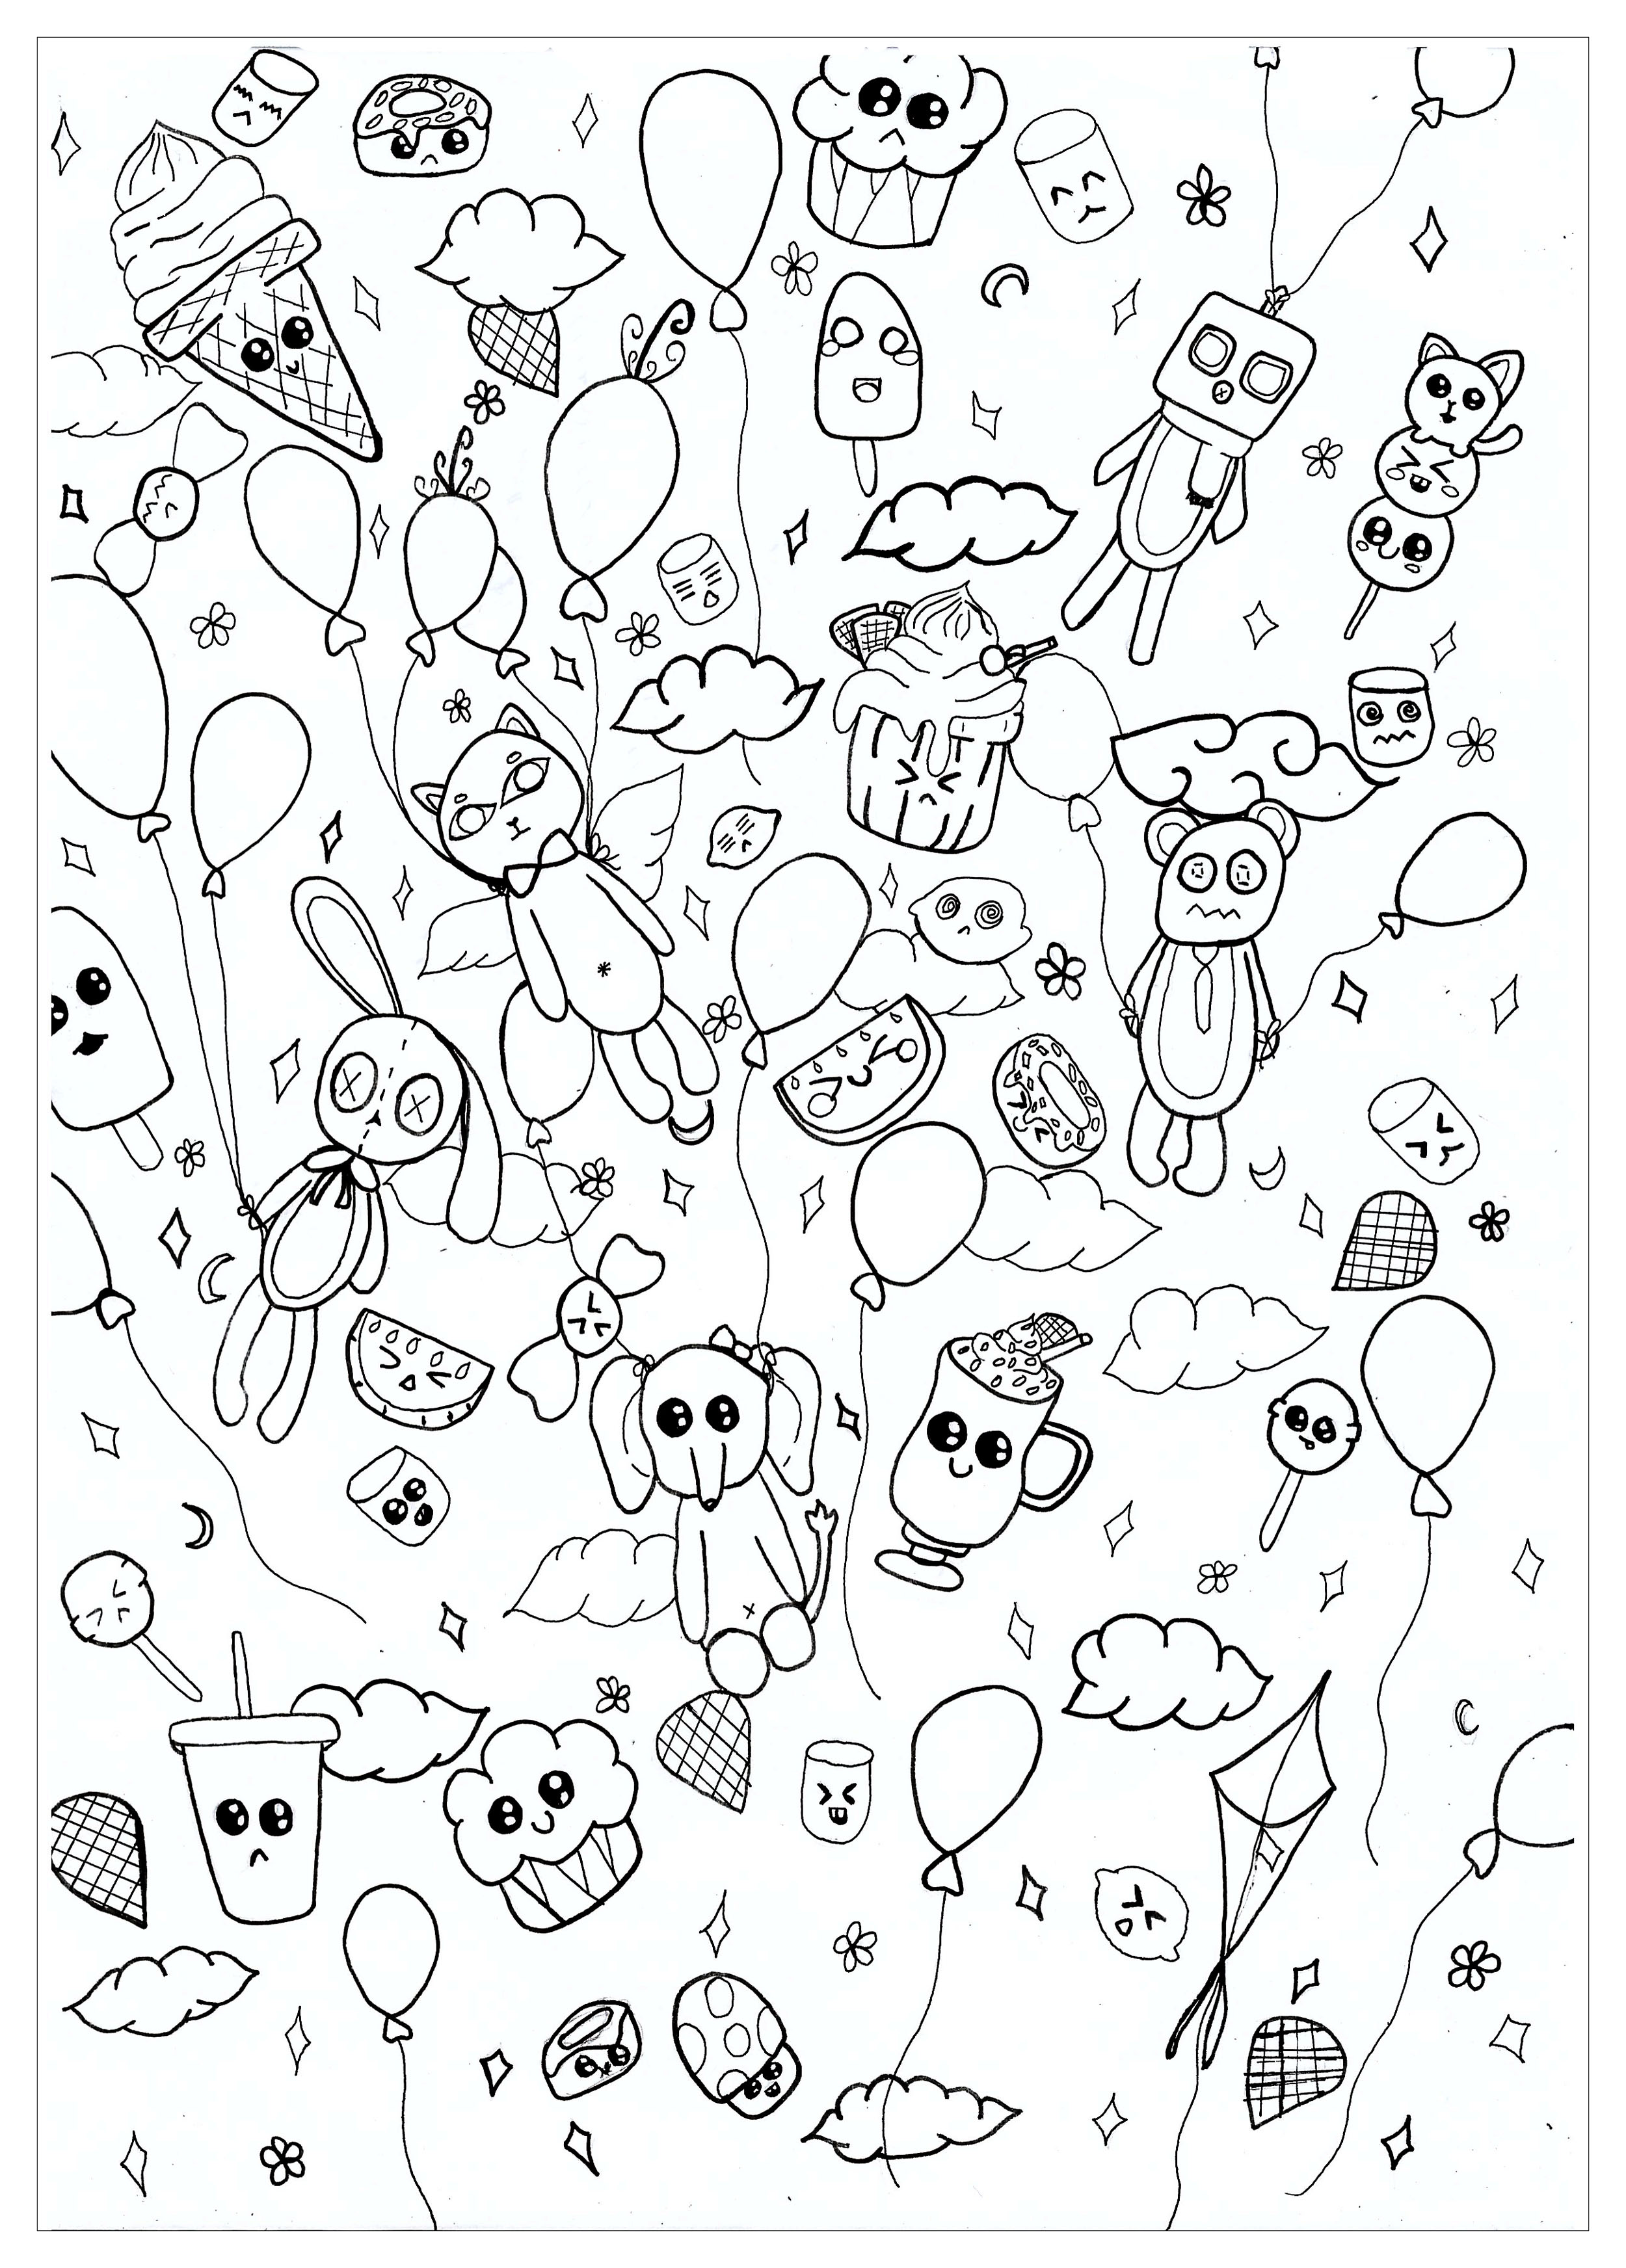 Doodle art free to color for kids - Doodle Art Kids Coloring Pages